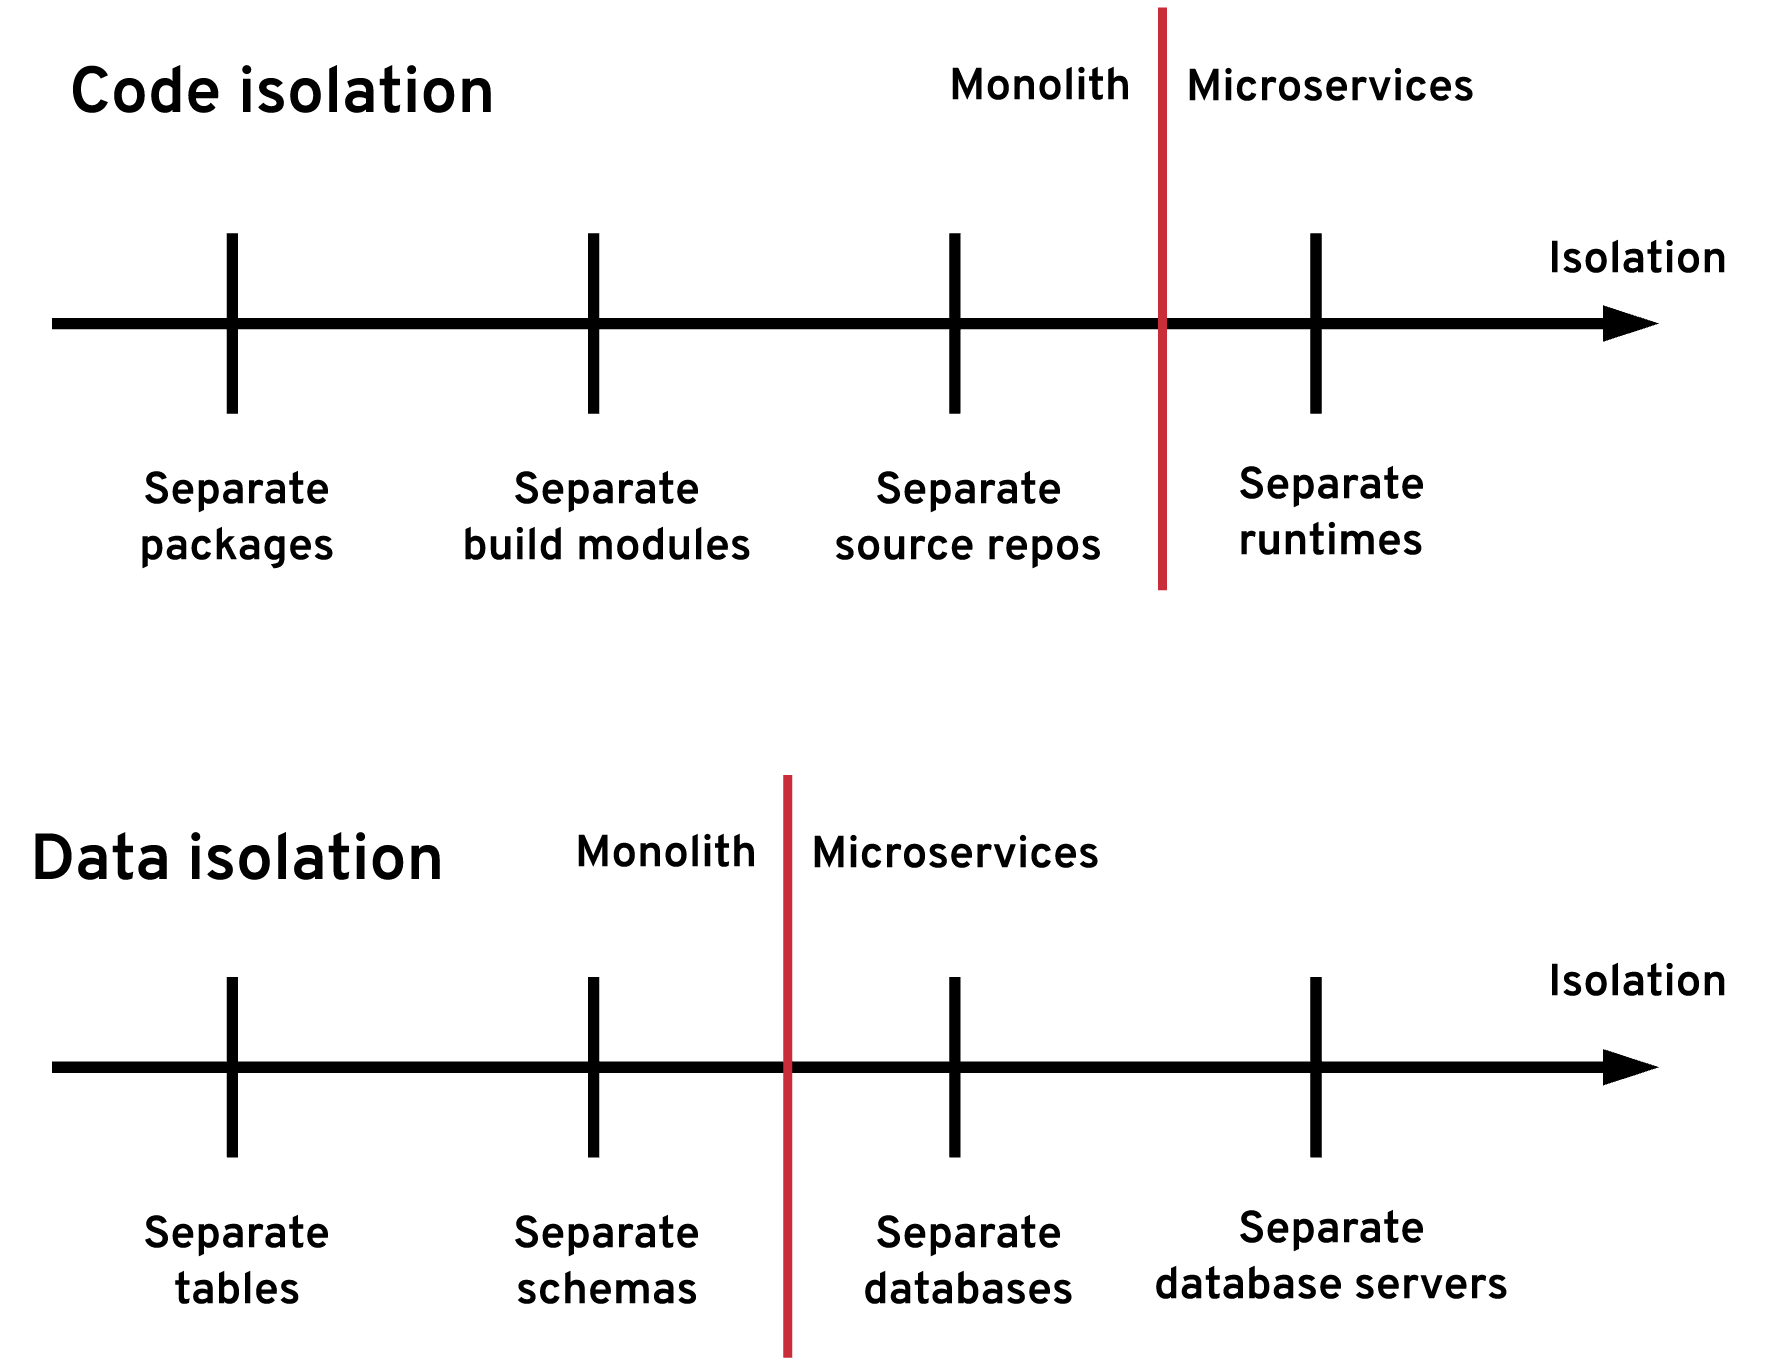 Transactional outbox. Microservice decomposition patterns.